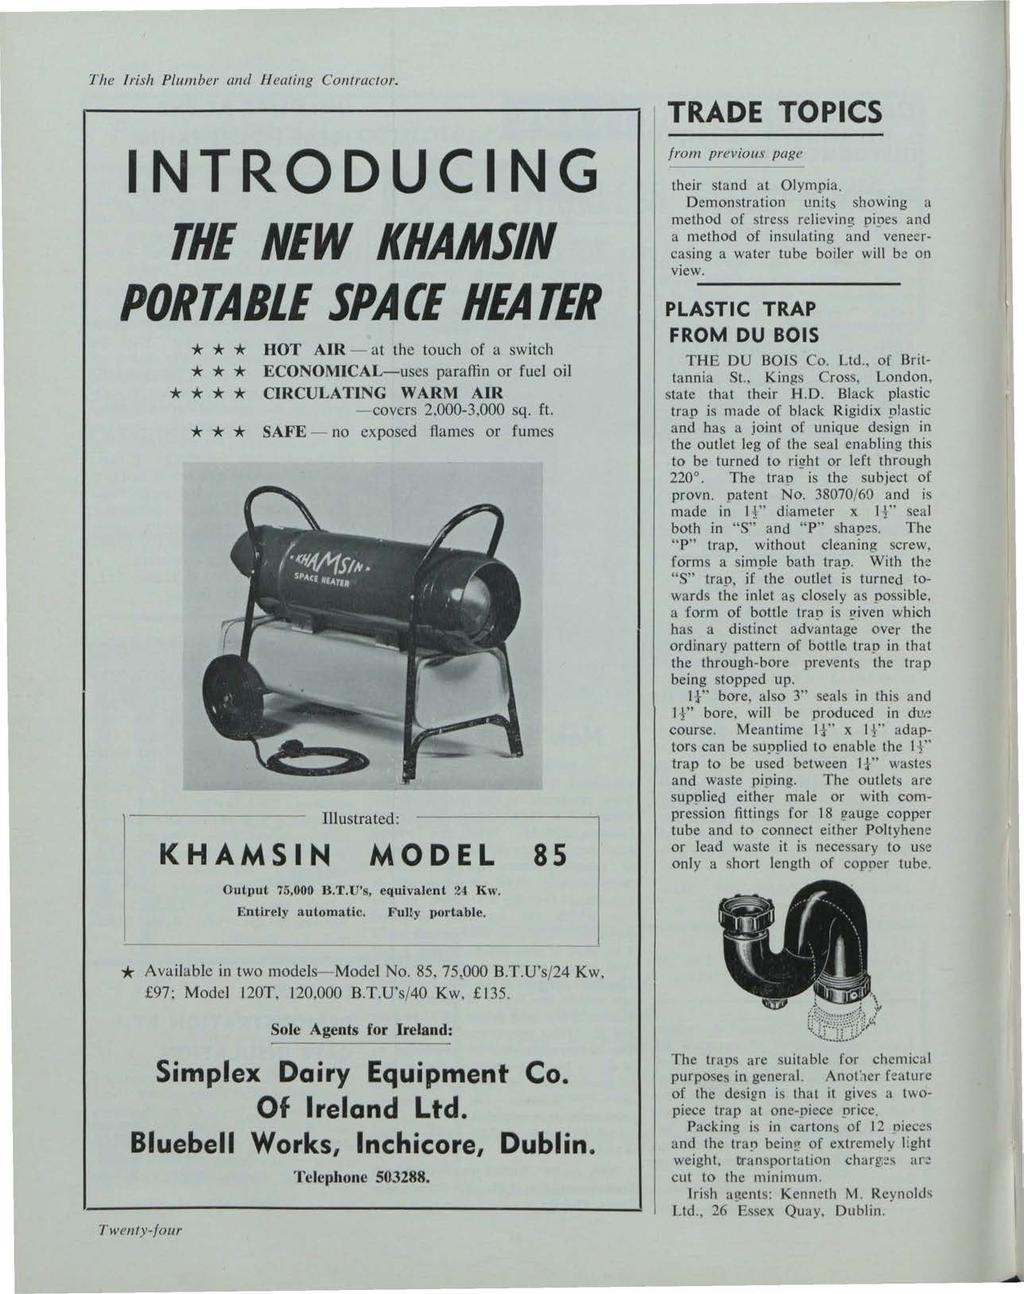 Building Services News, Vol. 2, Iss. 12 [1963], Art. 1 The Irish Plumber and Heating Contractor.